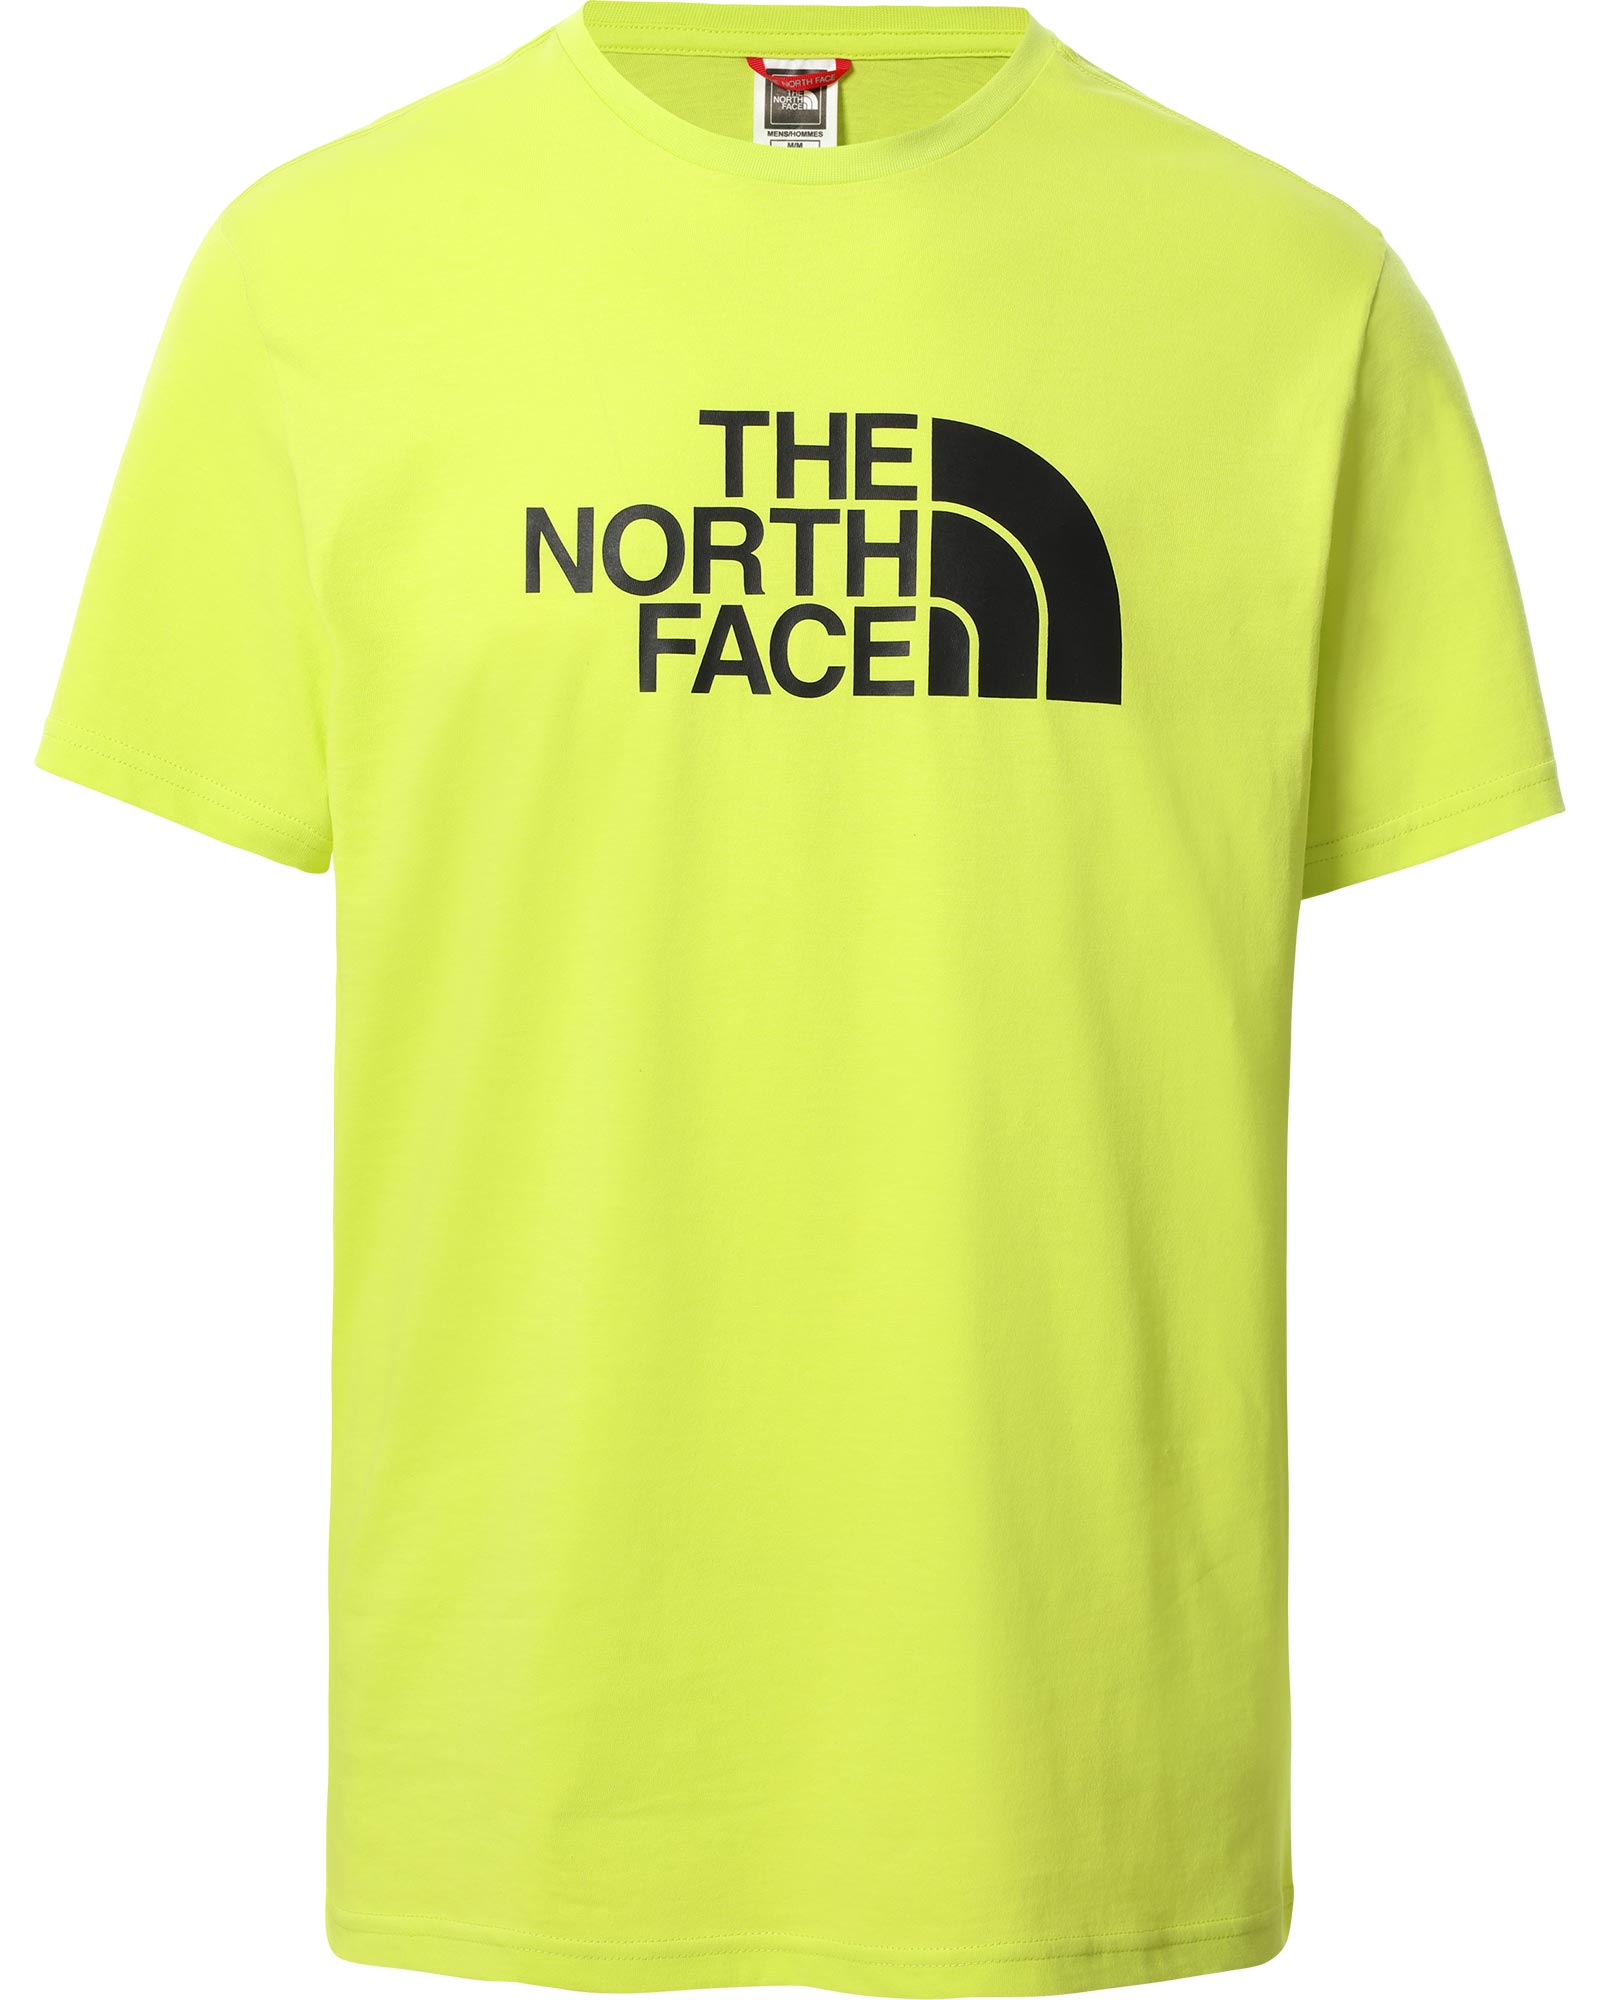 Product image of The North Face easy Men's T-Shirt